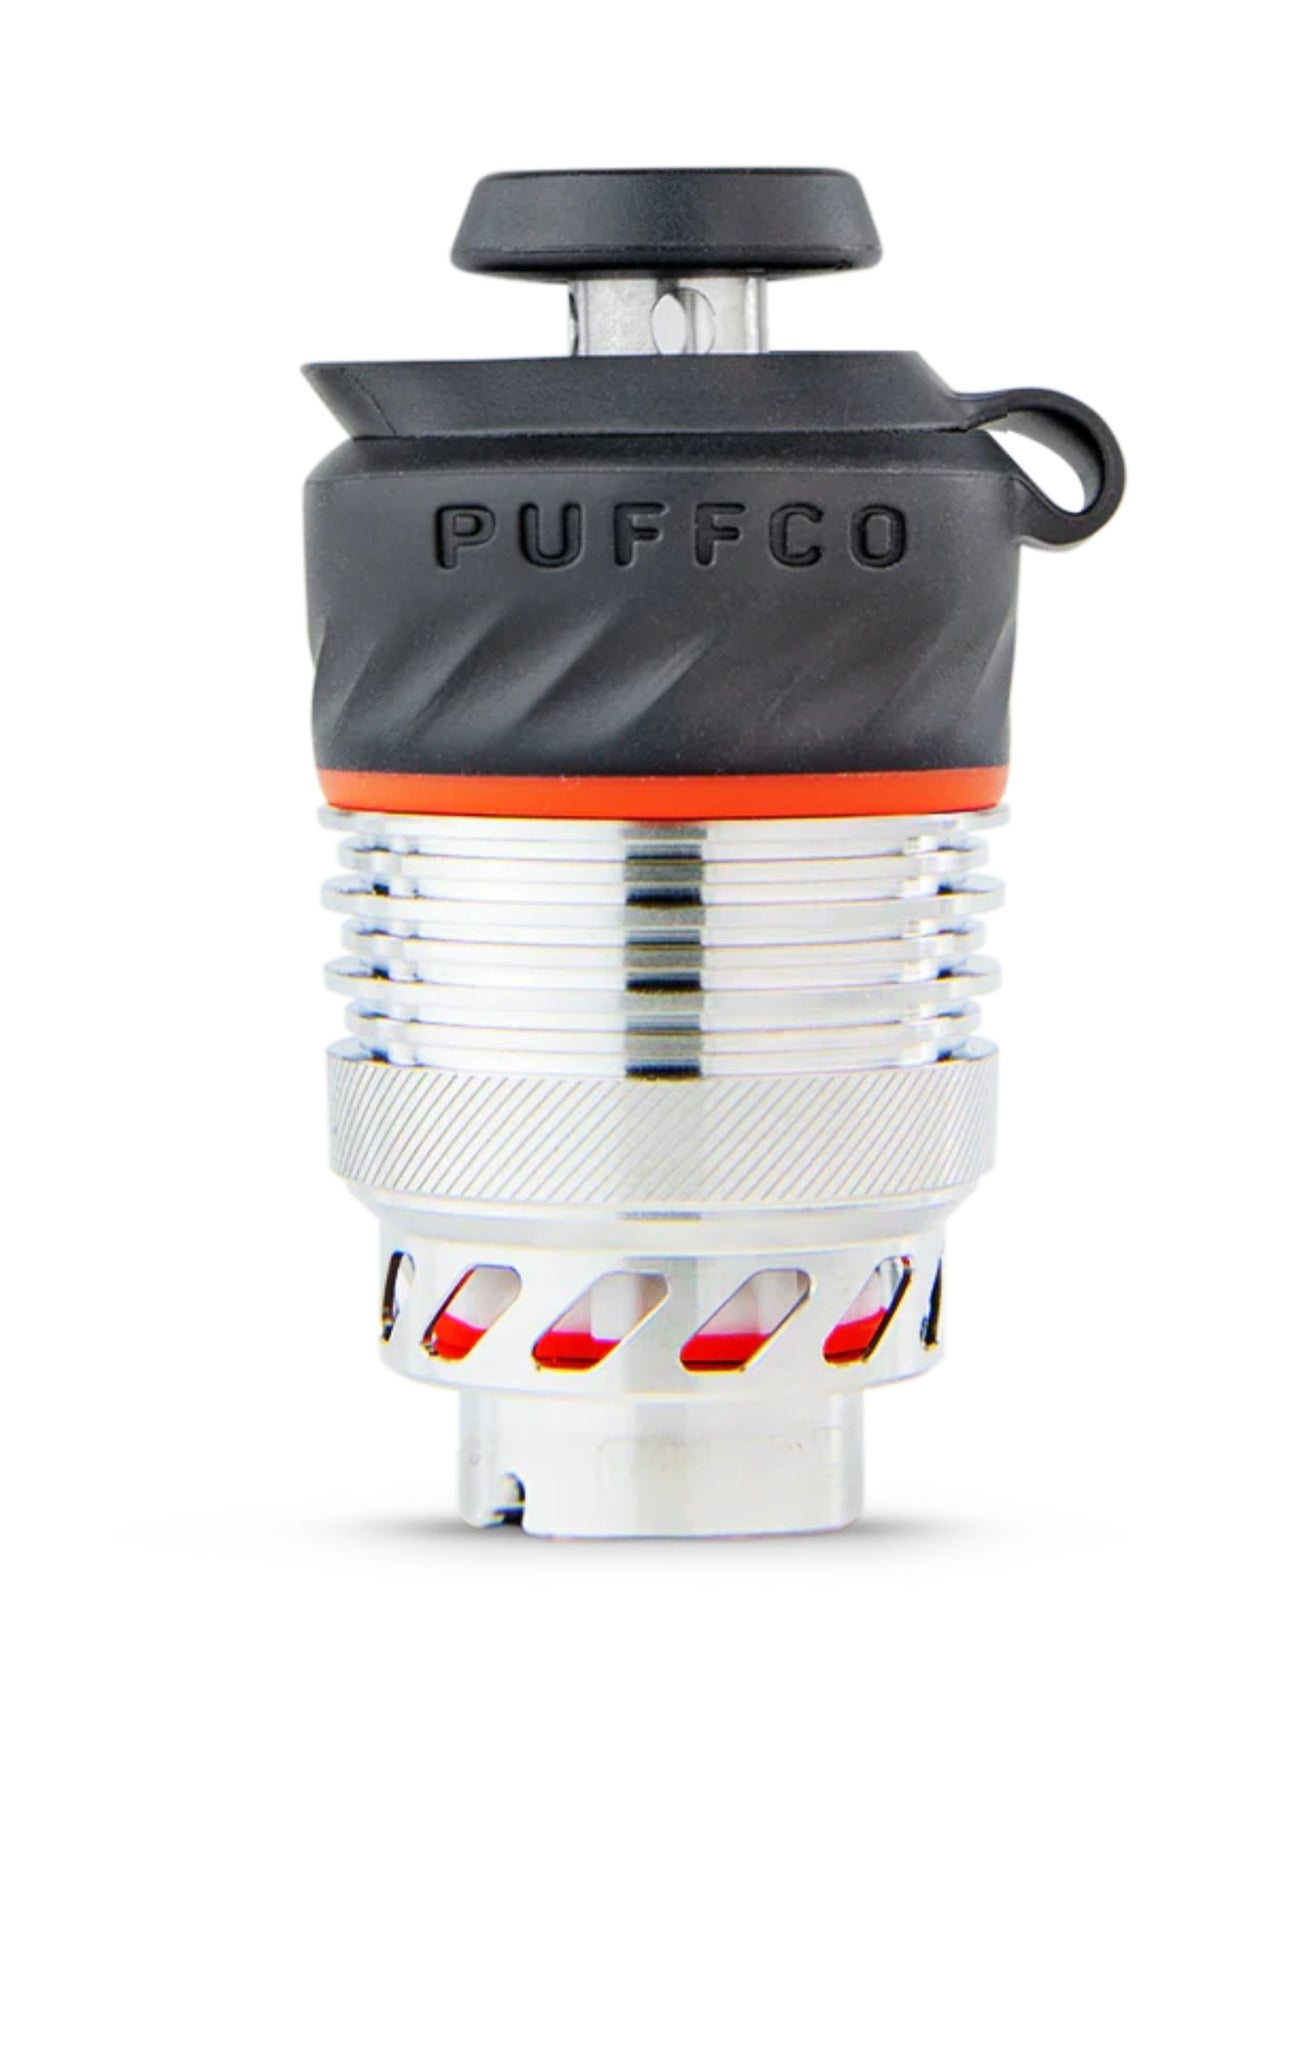 Puffco Peak Pro chamber – ABSNTMINDED